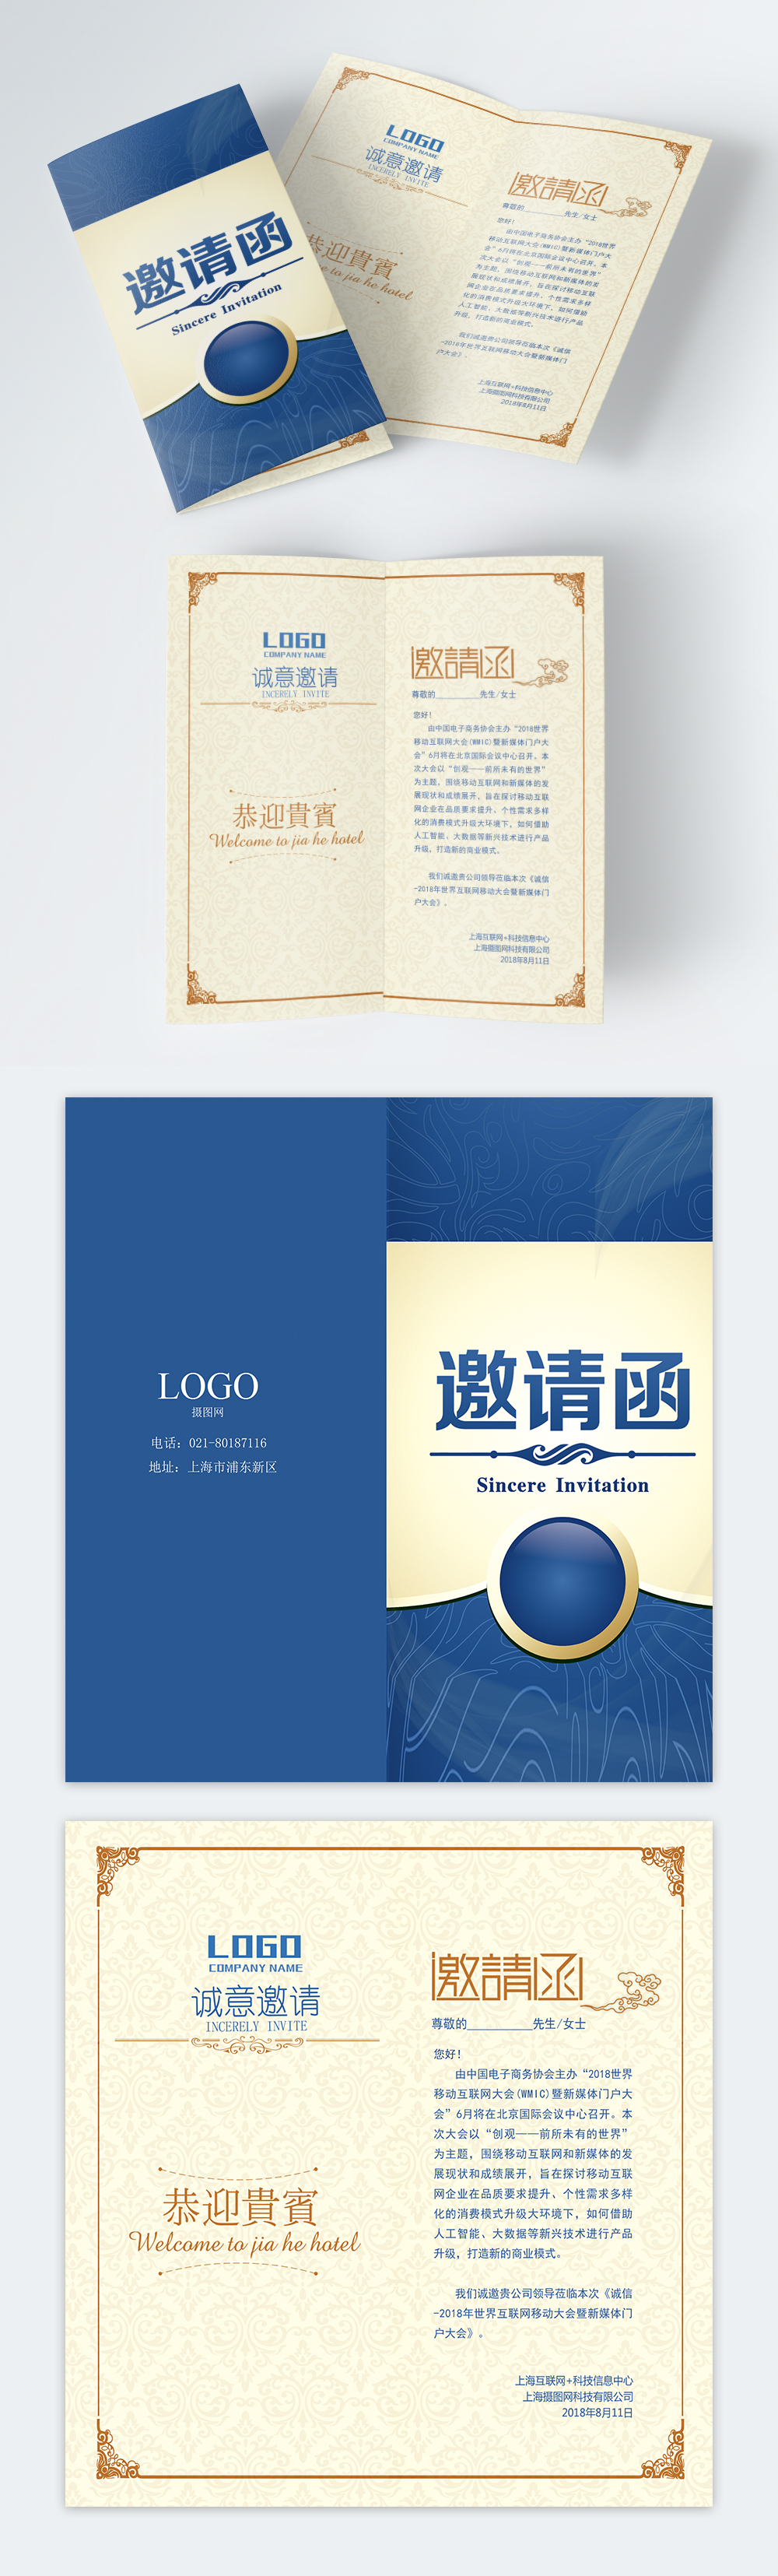 blue-invitation-letter-template-image-picture-free-download-400251388